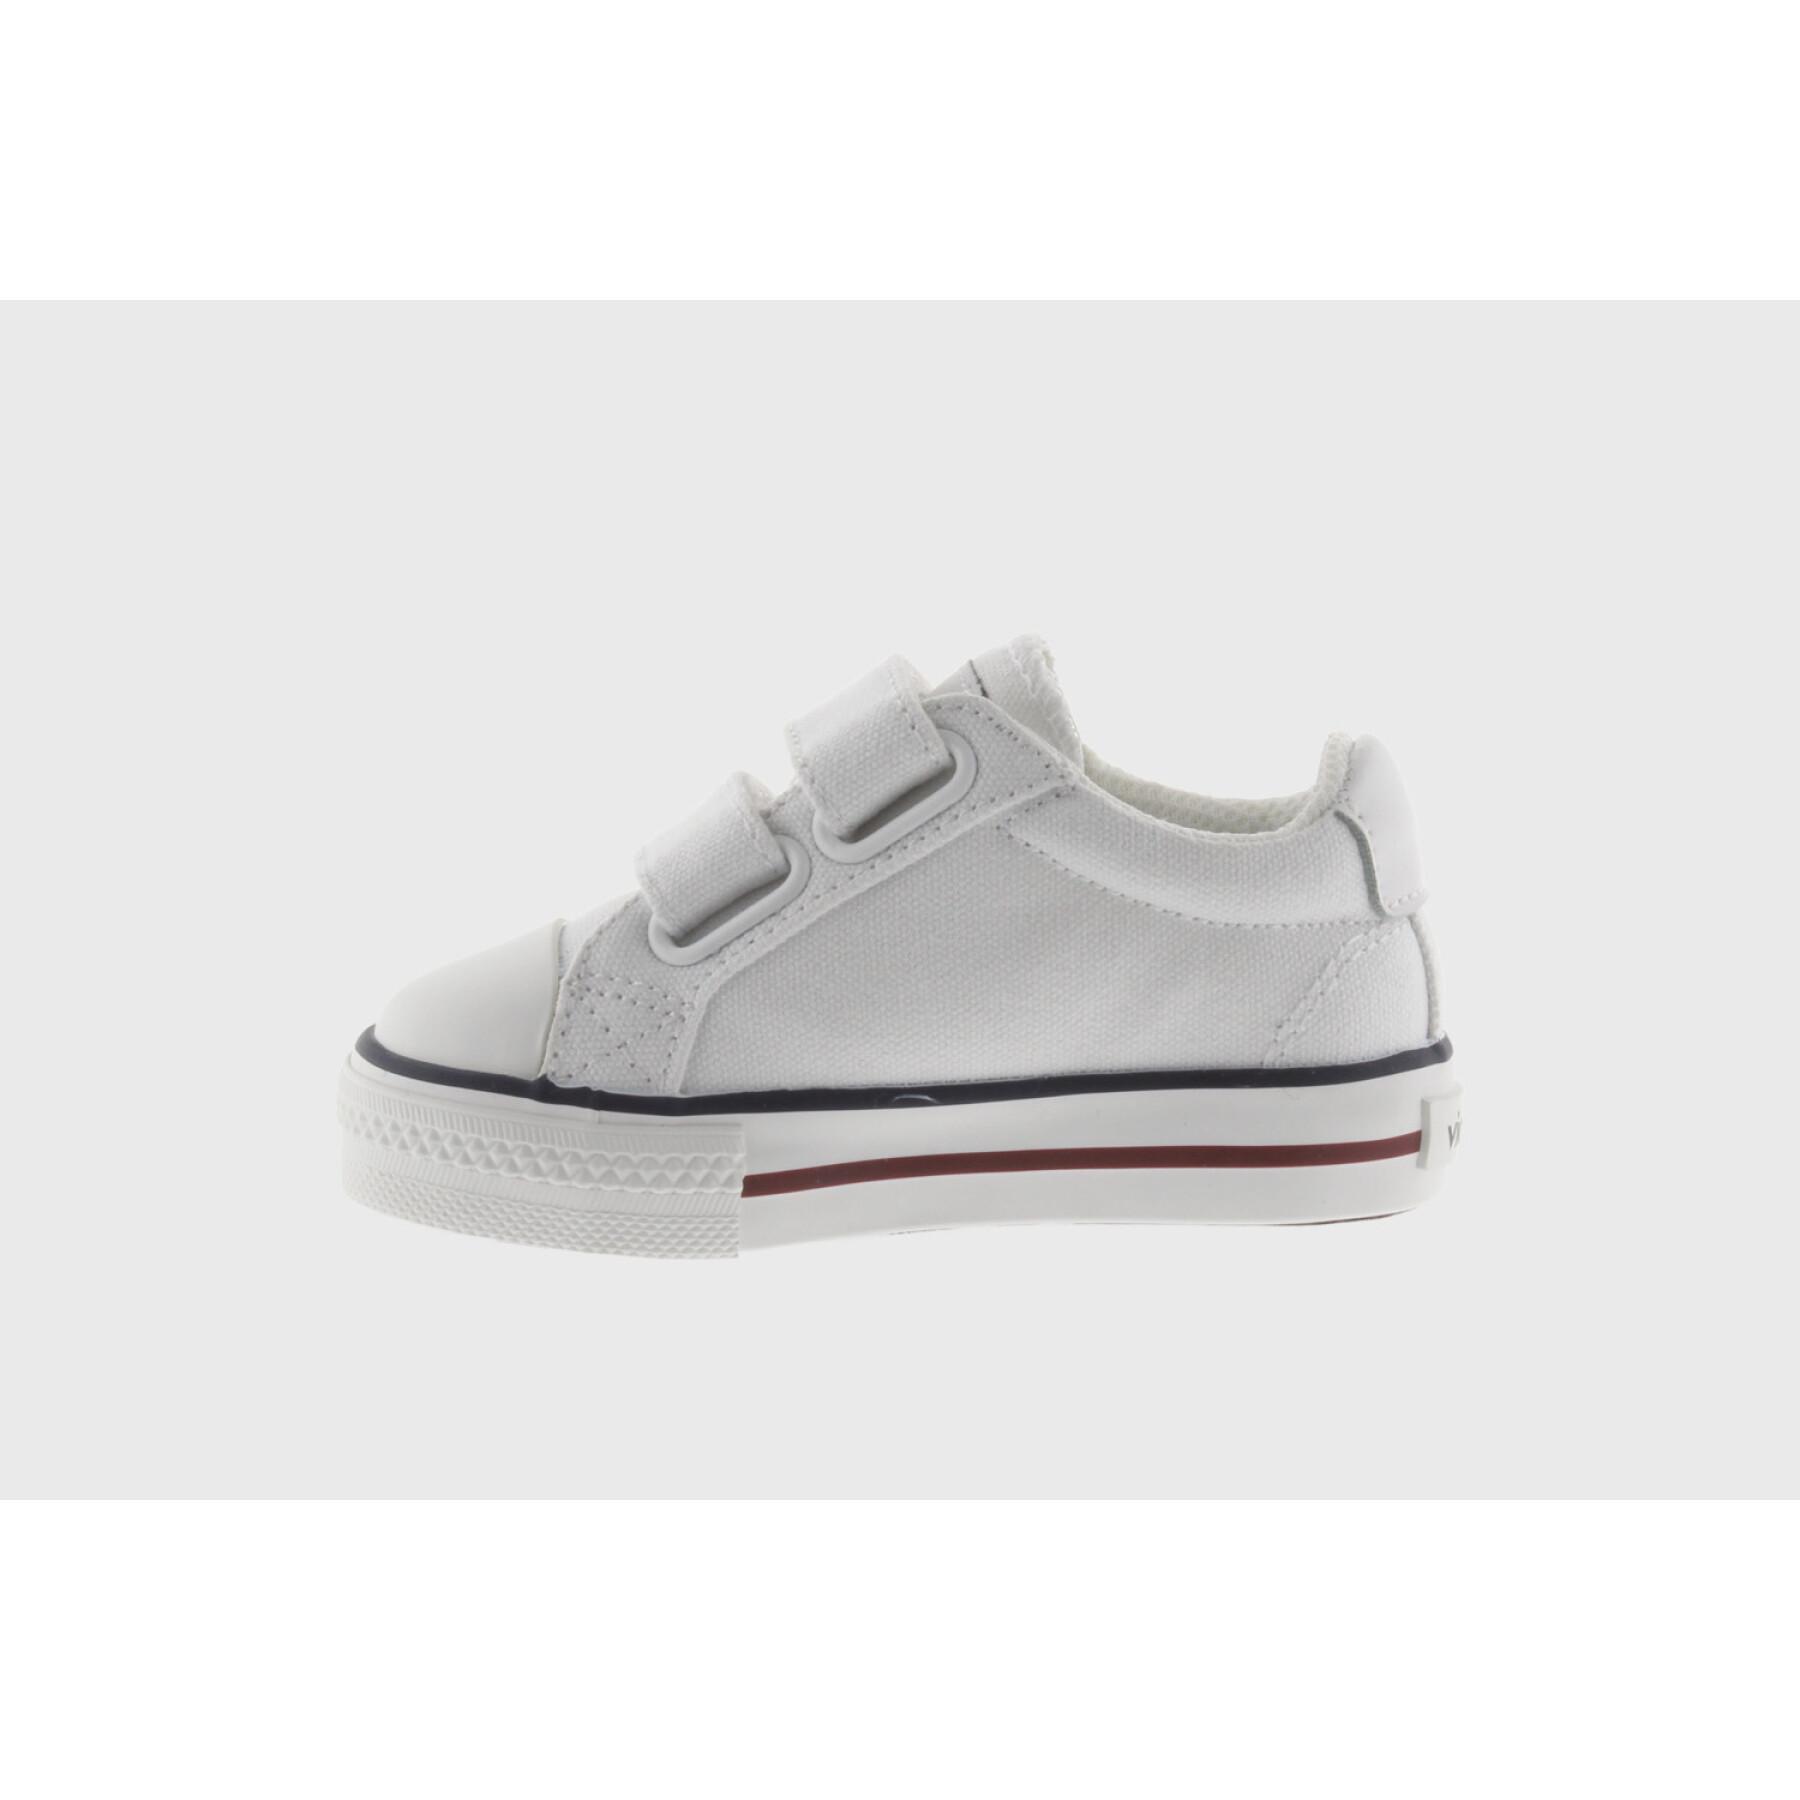 Chaussures petites tailles fille Victoria tribu